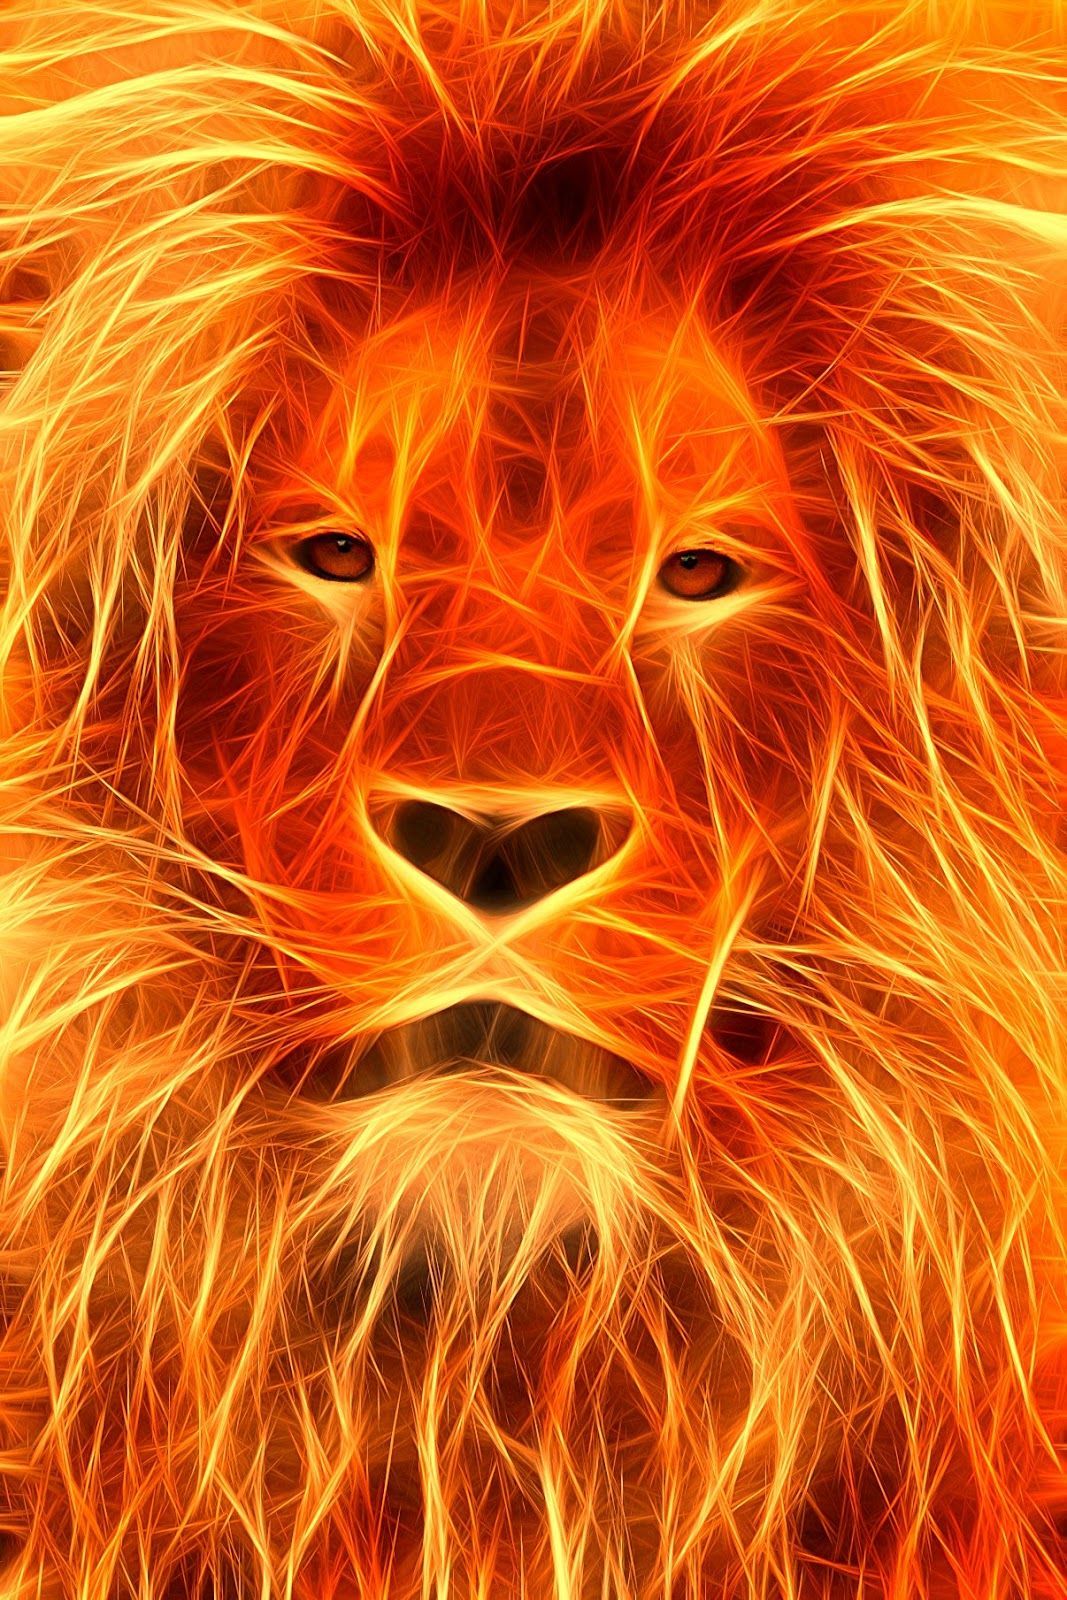 Star Steeds and Other Dreams: THE FIRE LION. Fire lion, Lion art, Lion